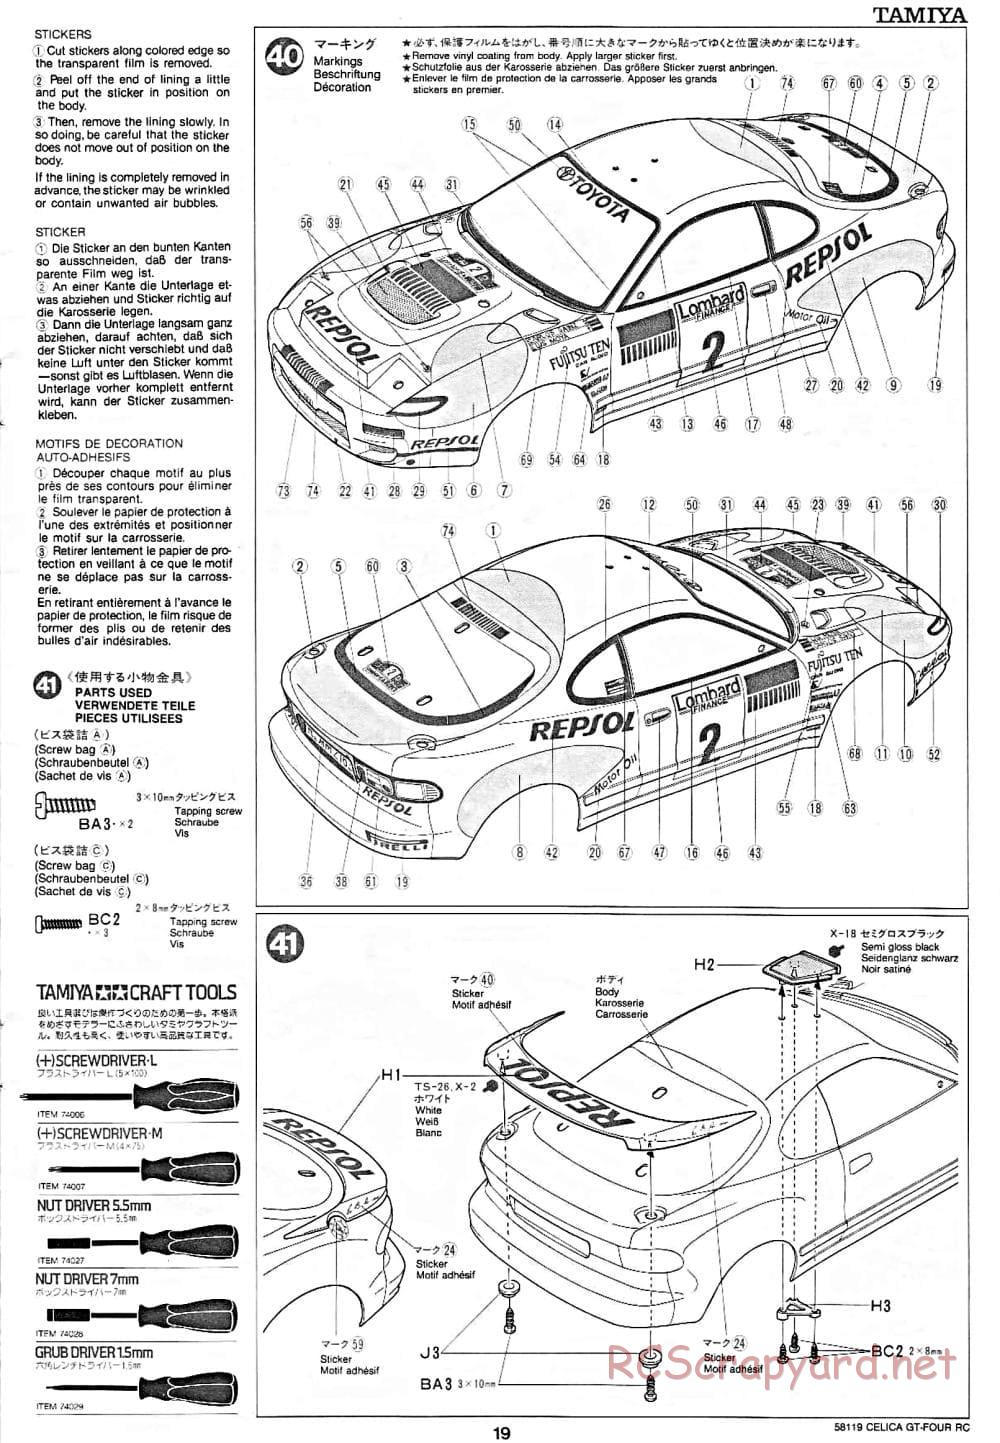 Tamiya - Toyota Celica GT-Four RC - TA-01 Chassis - Manual - Page 19